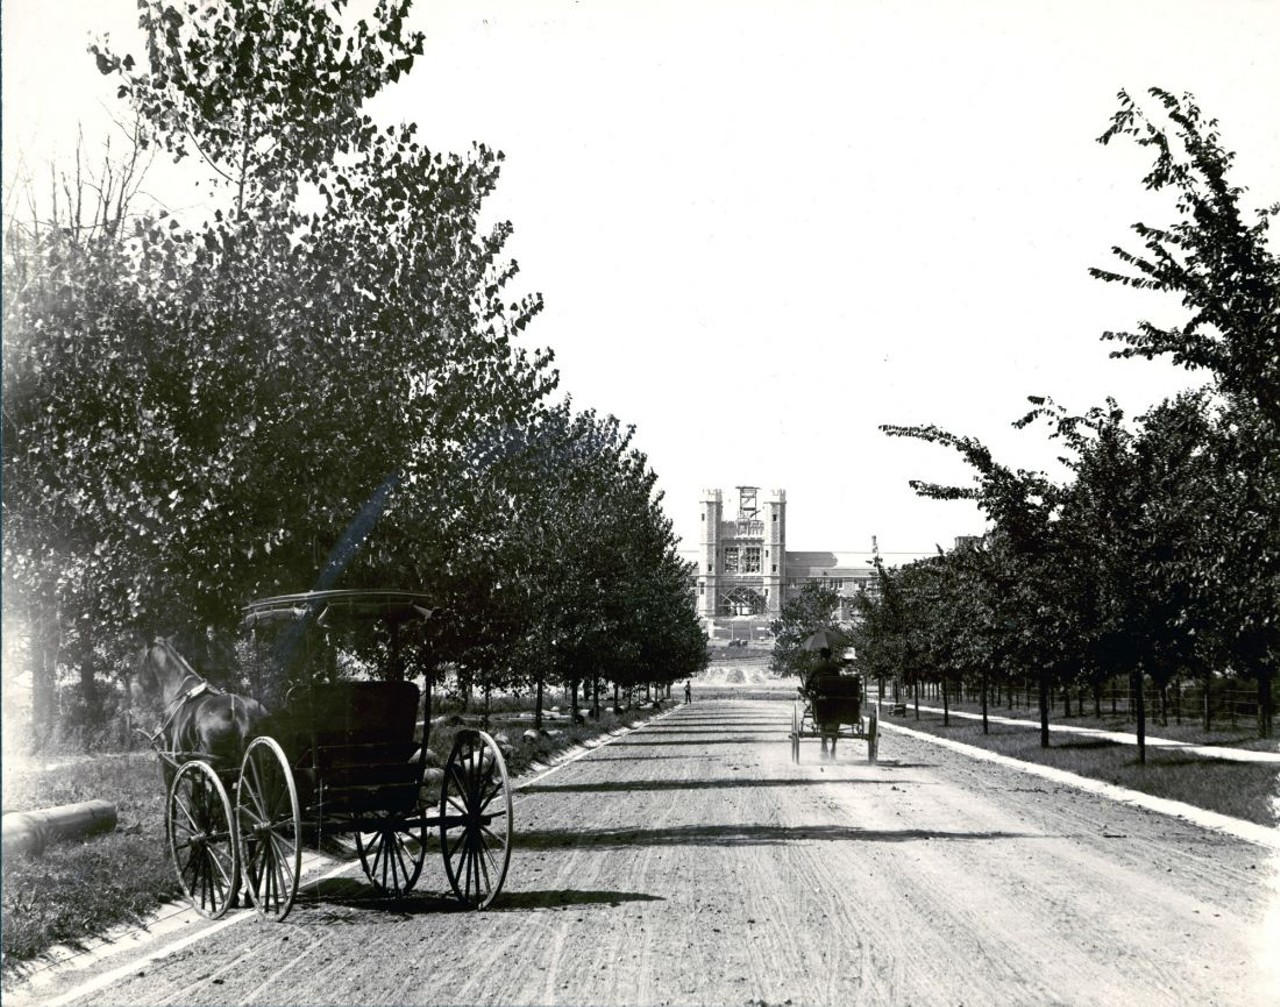 VIEW ALONG THE STREET (LINDELL AVENUE) LEADING TO THE 1904 WORLD'S FAIR ADMINISTRATION BUILDING . SITE LATER OCCUPIED BY FOREIGN STATE BUILDINGS. ADMINISTRATION BUILDING, LATER BROOKINGS HALL, UNDER CONSTRUCTION.
Find out more about this photo at MoHistory.org.